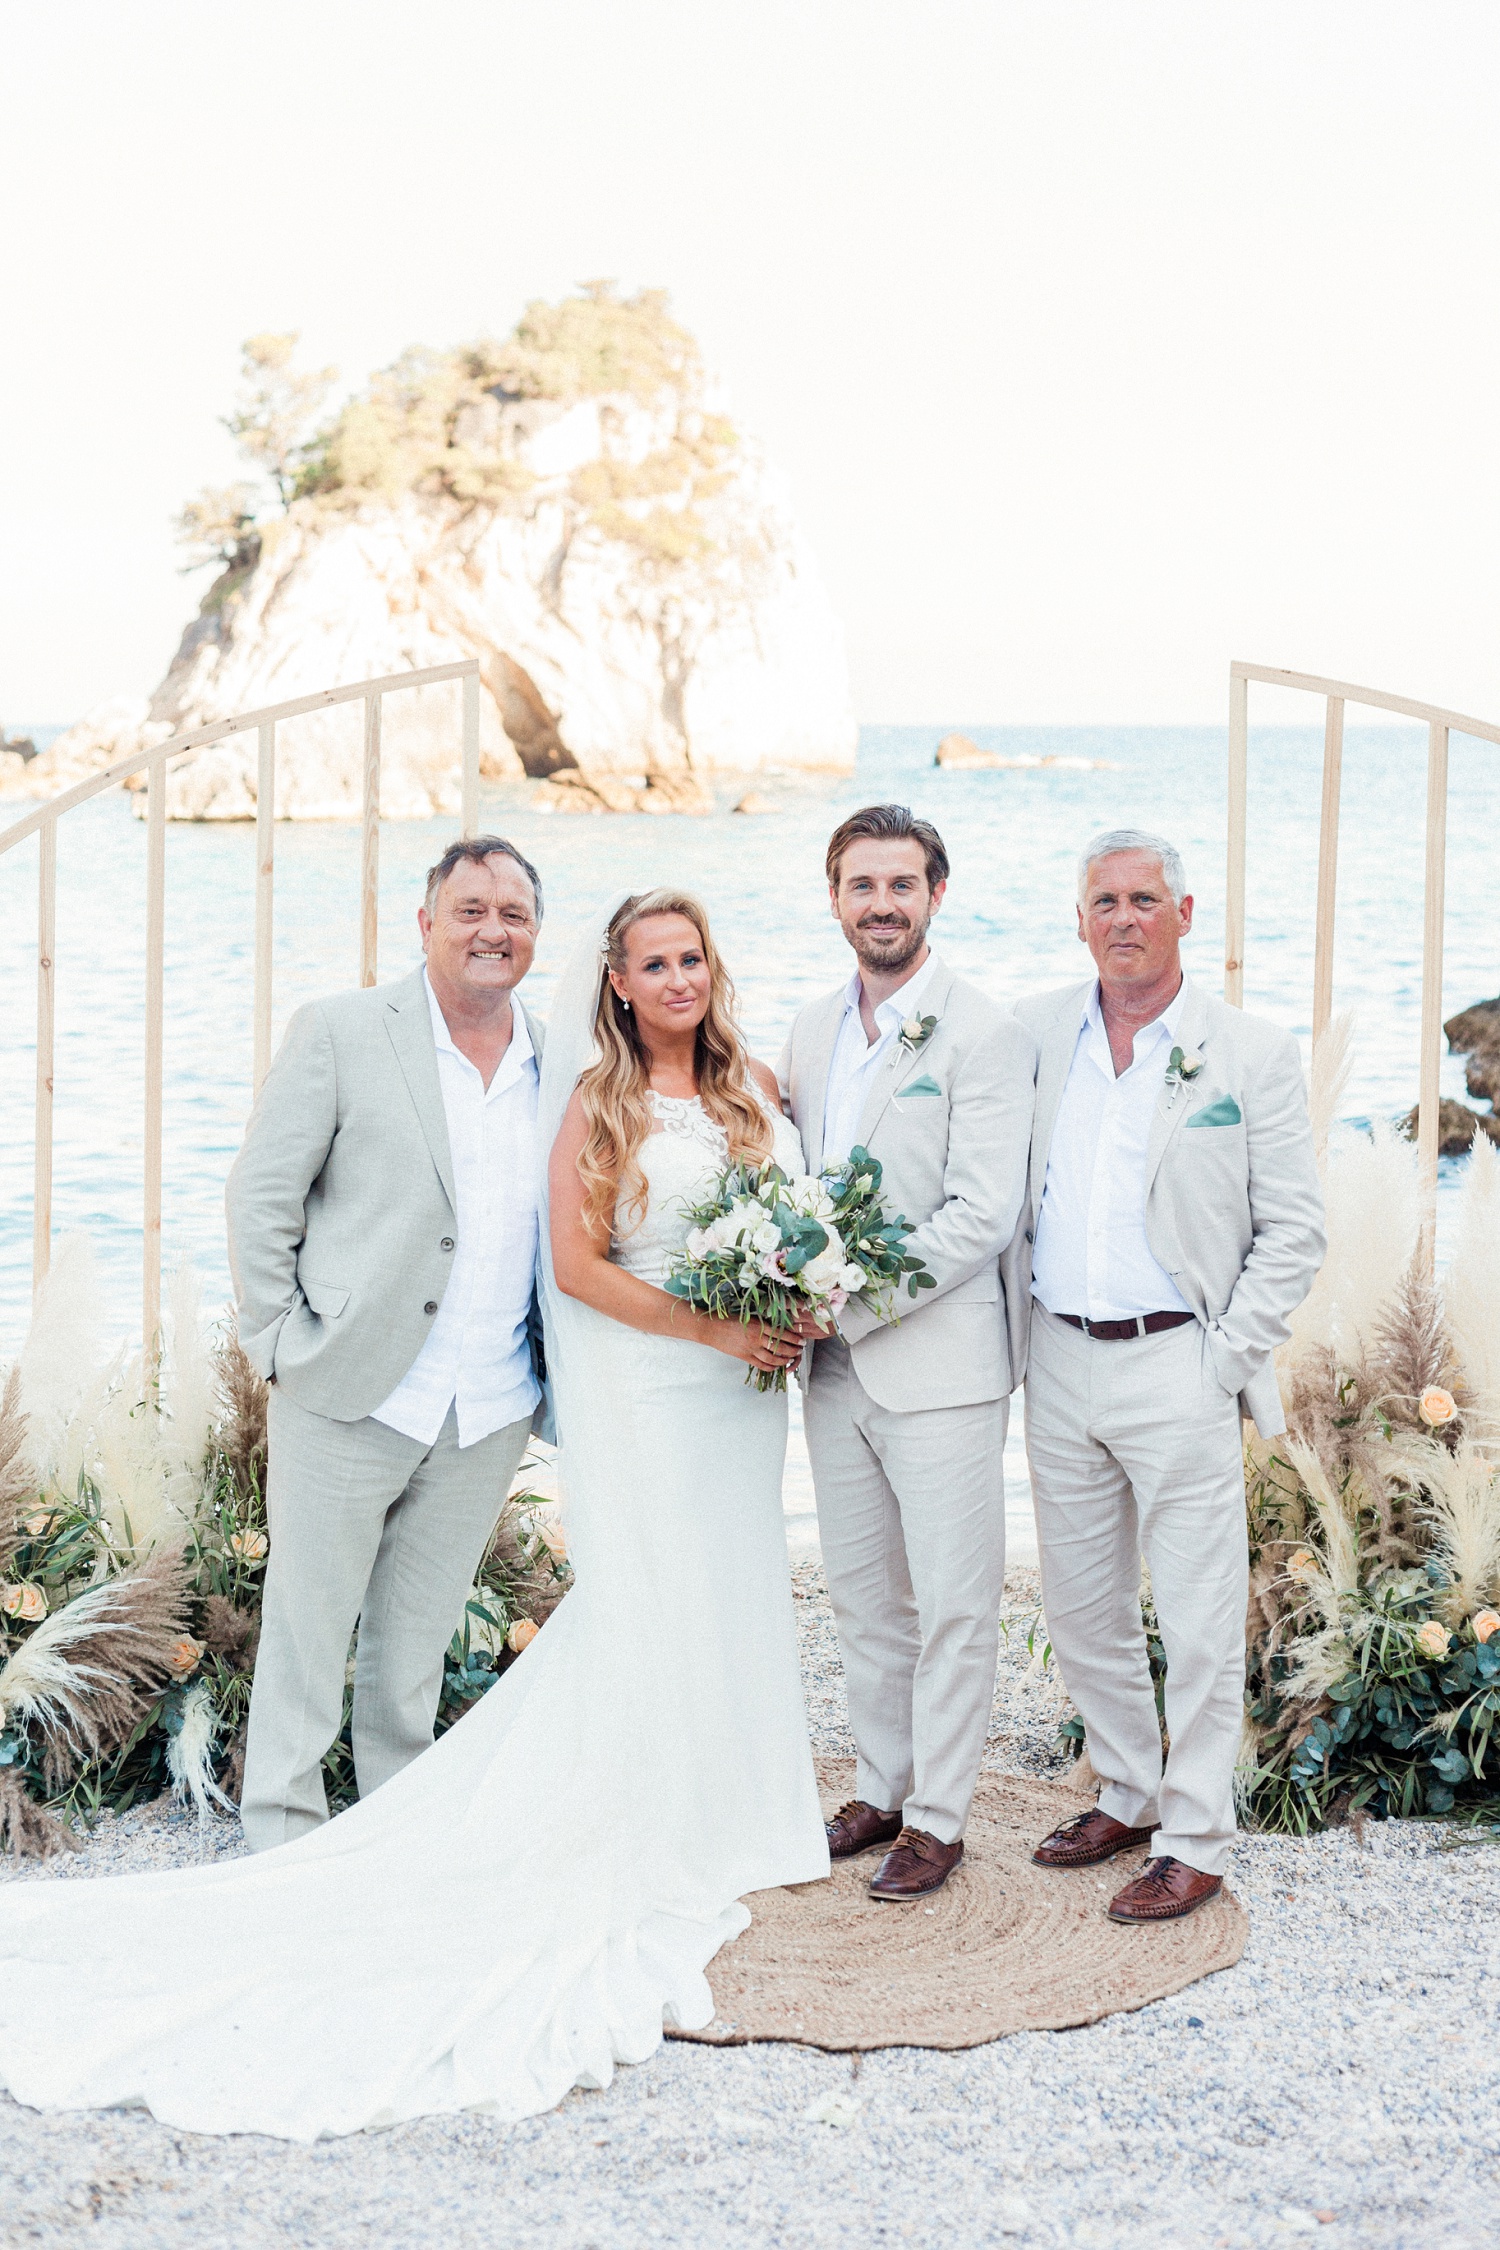 Bridal party wearing neutral tones at a beach wedding in Parga